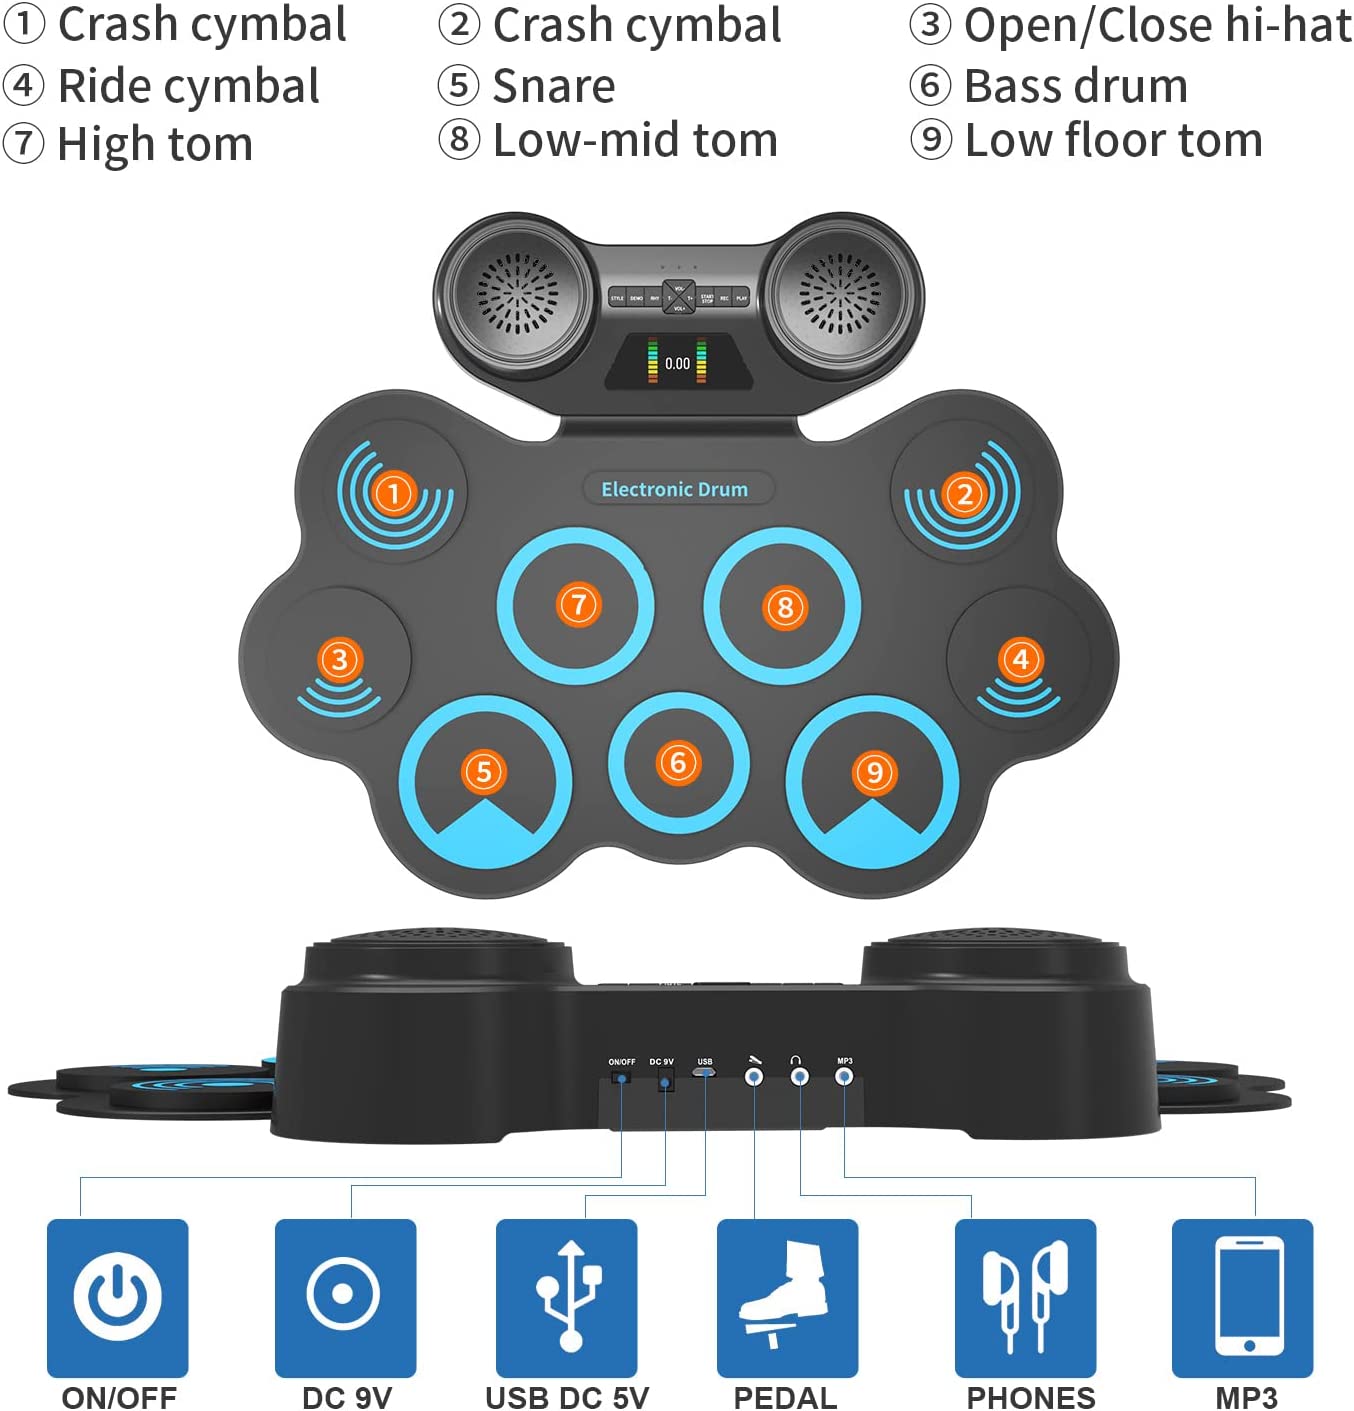 K-MD668 Portable Digital Drumset Professional Roll Up MIDI Drum Pads with Built-In Speaker and Sounds